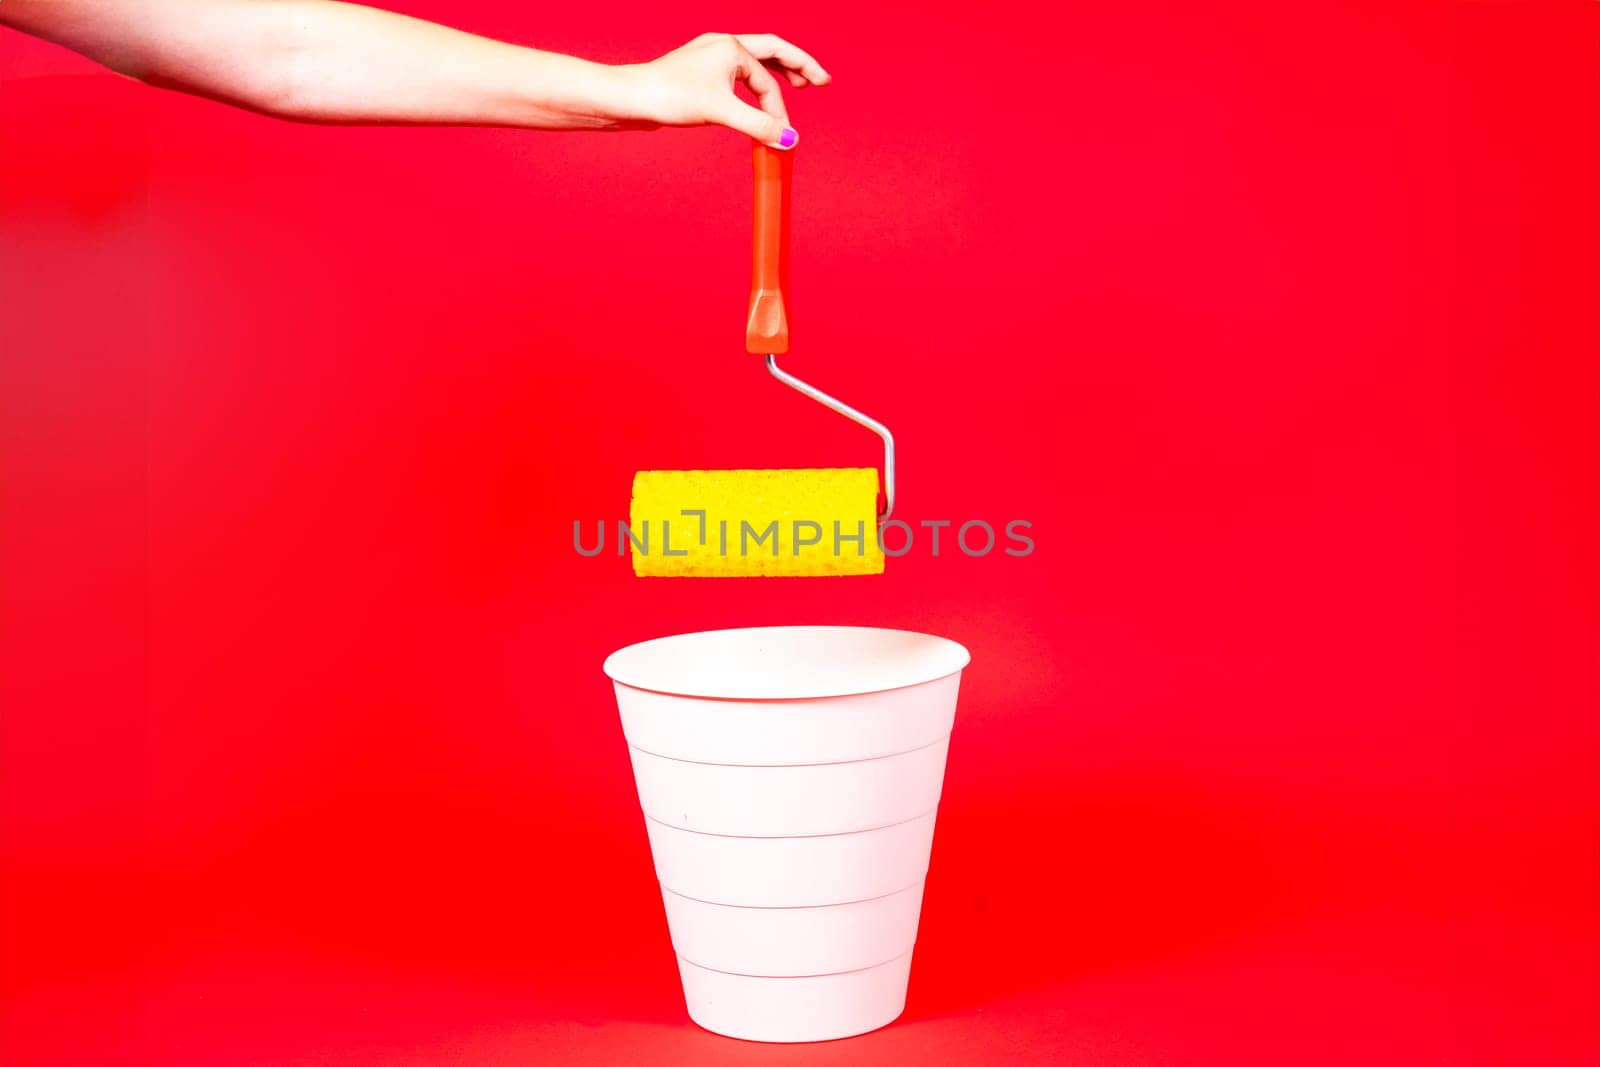 Construction roller is thrown into the trash on red background